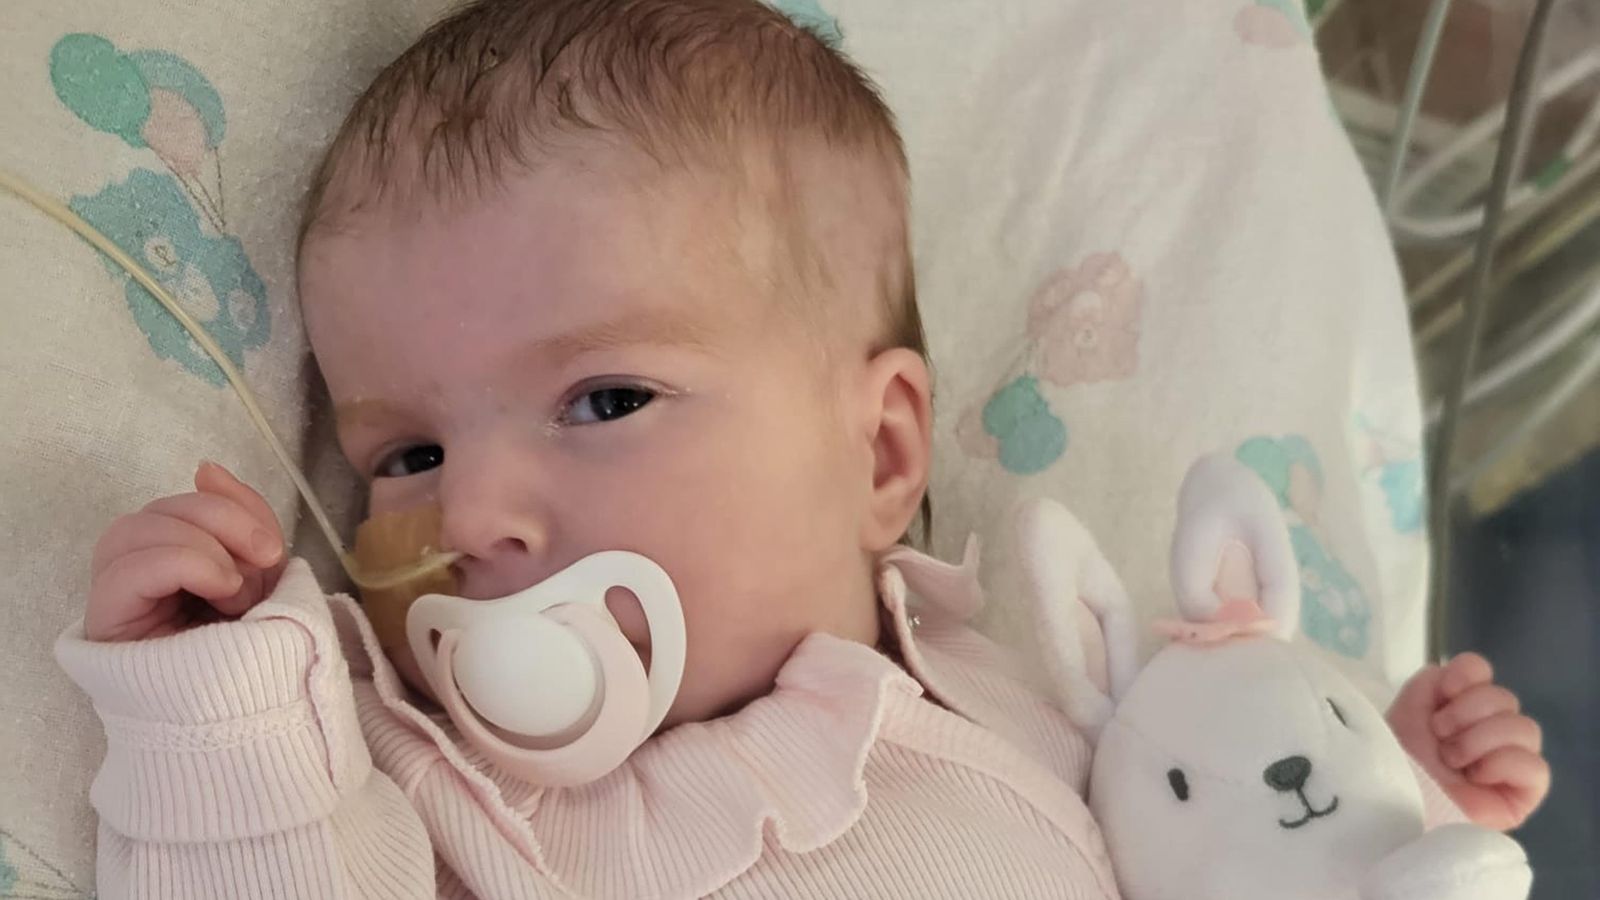 Indi Gregory: Critically ill baby has life-support treatment withdrawn